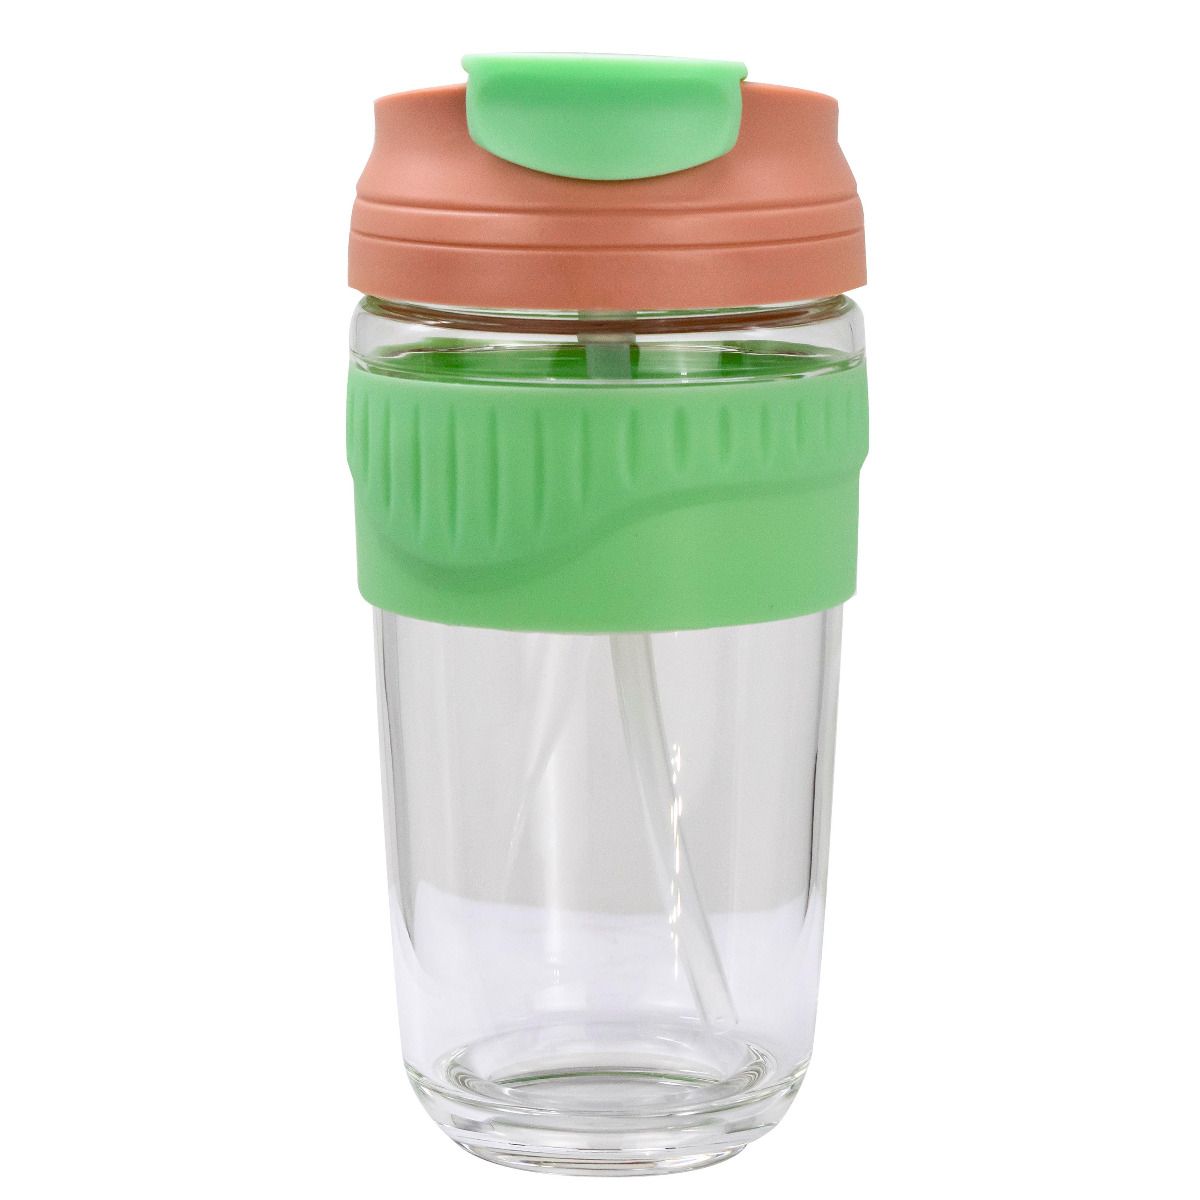 Coffee glass cup rubber holder e-371 350ml green